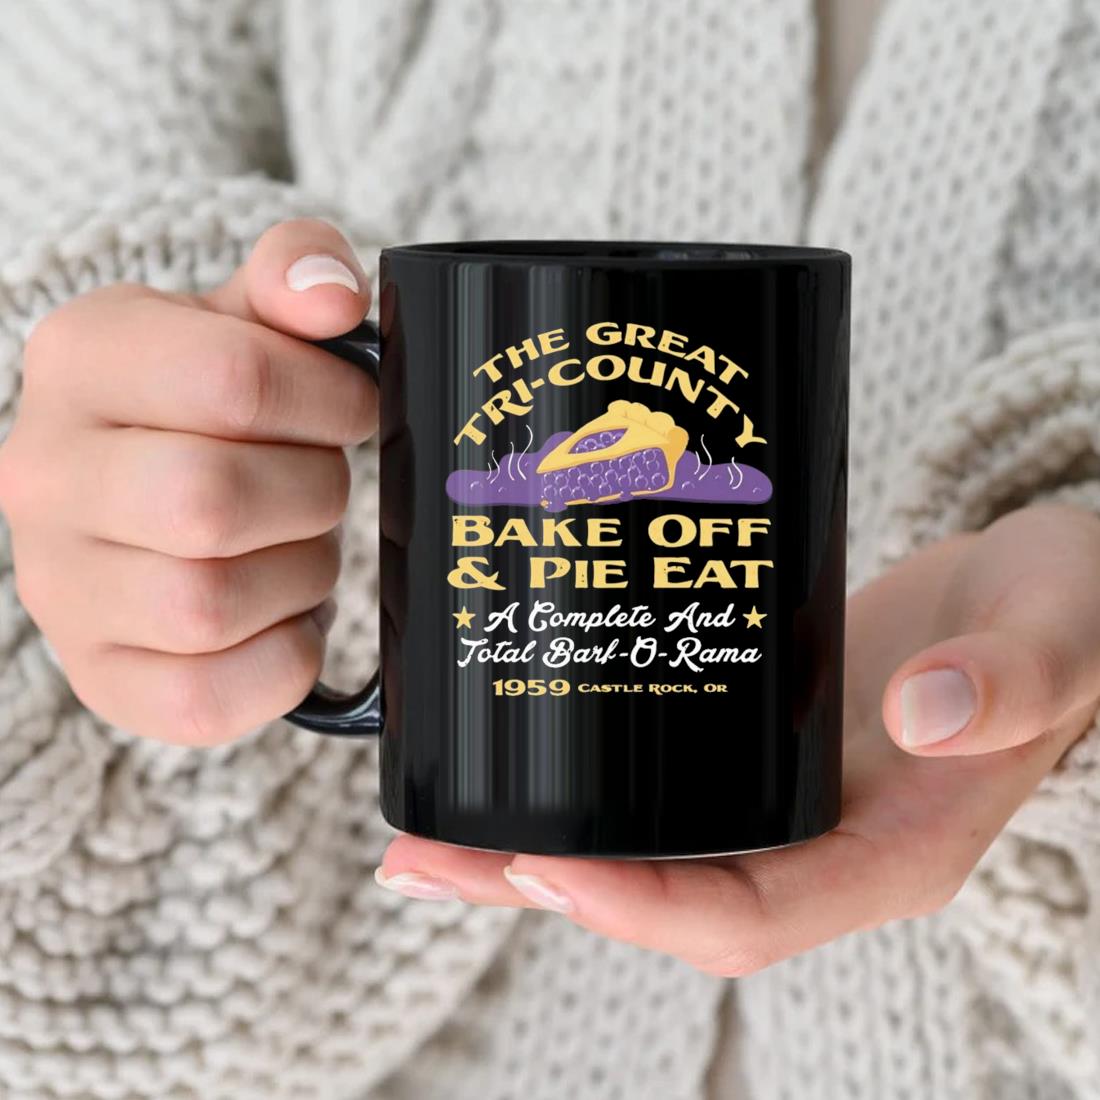 The Great Tri-county Bake Off & Pie Eat Mug